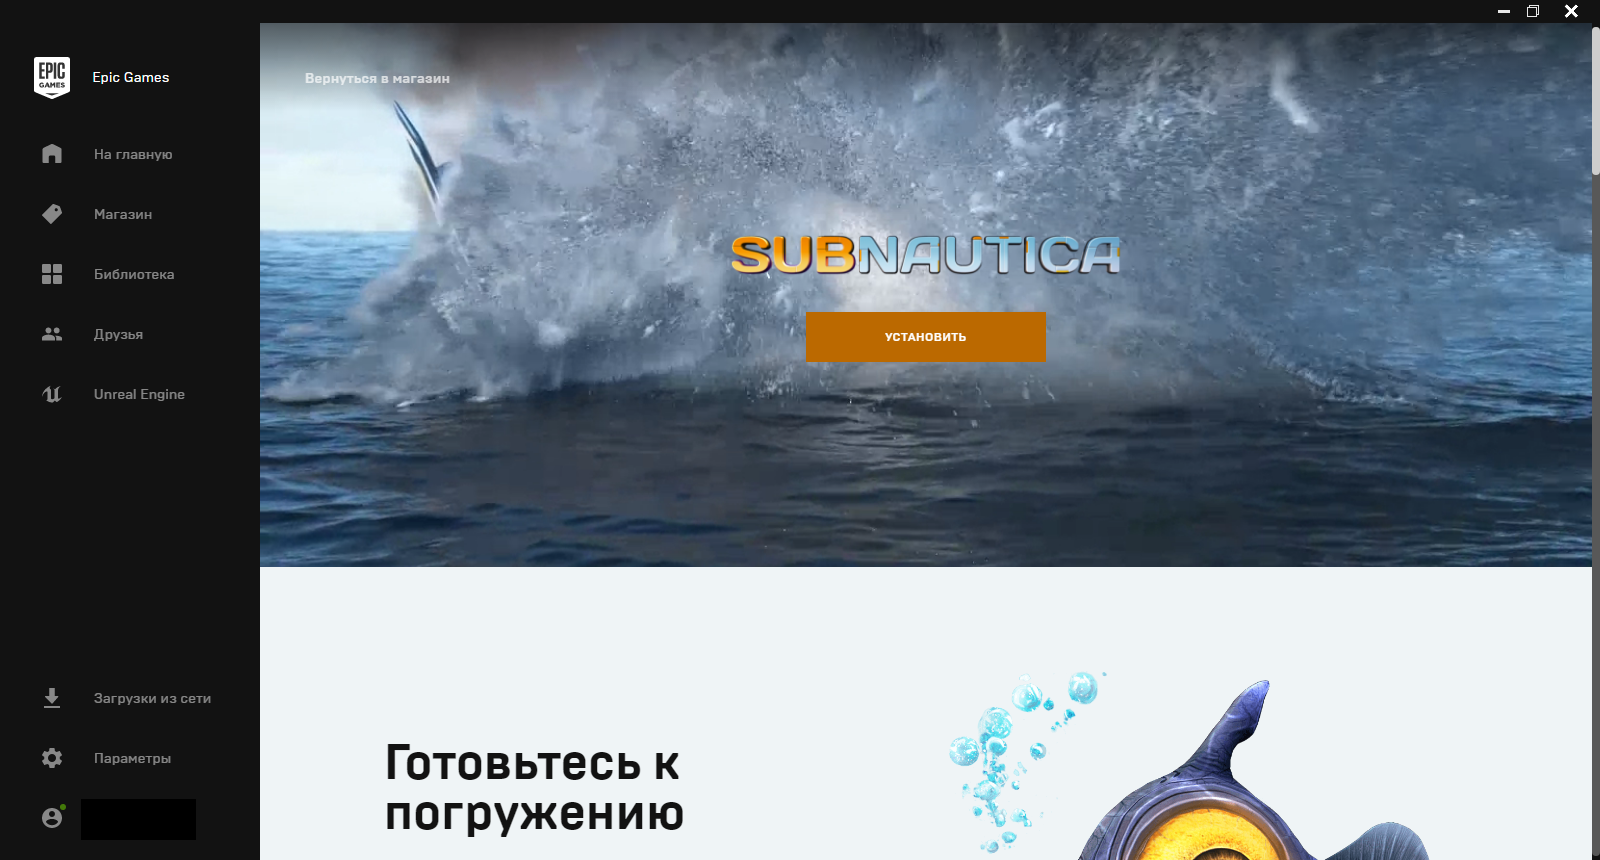 Subnautica for free on the epic games store - Freebie, Subnautica, Epic Games Store, Not Steam